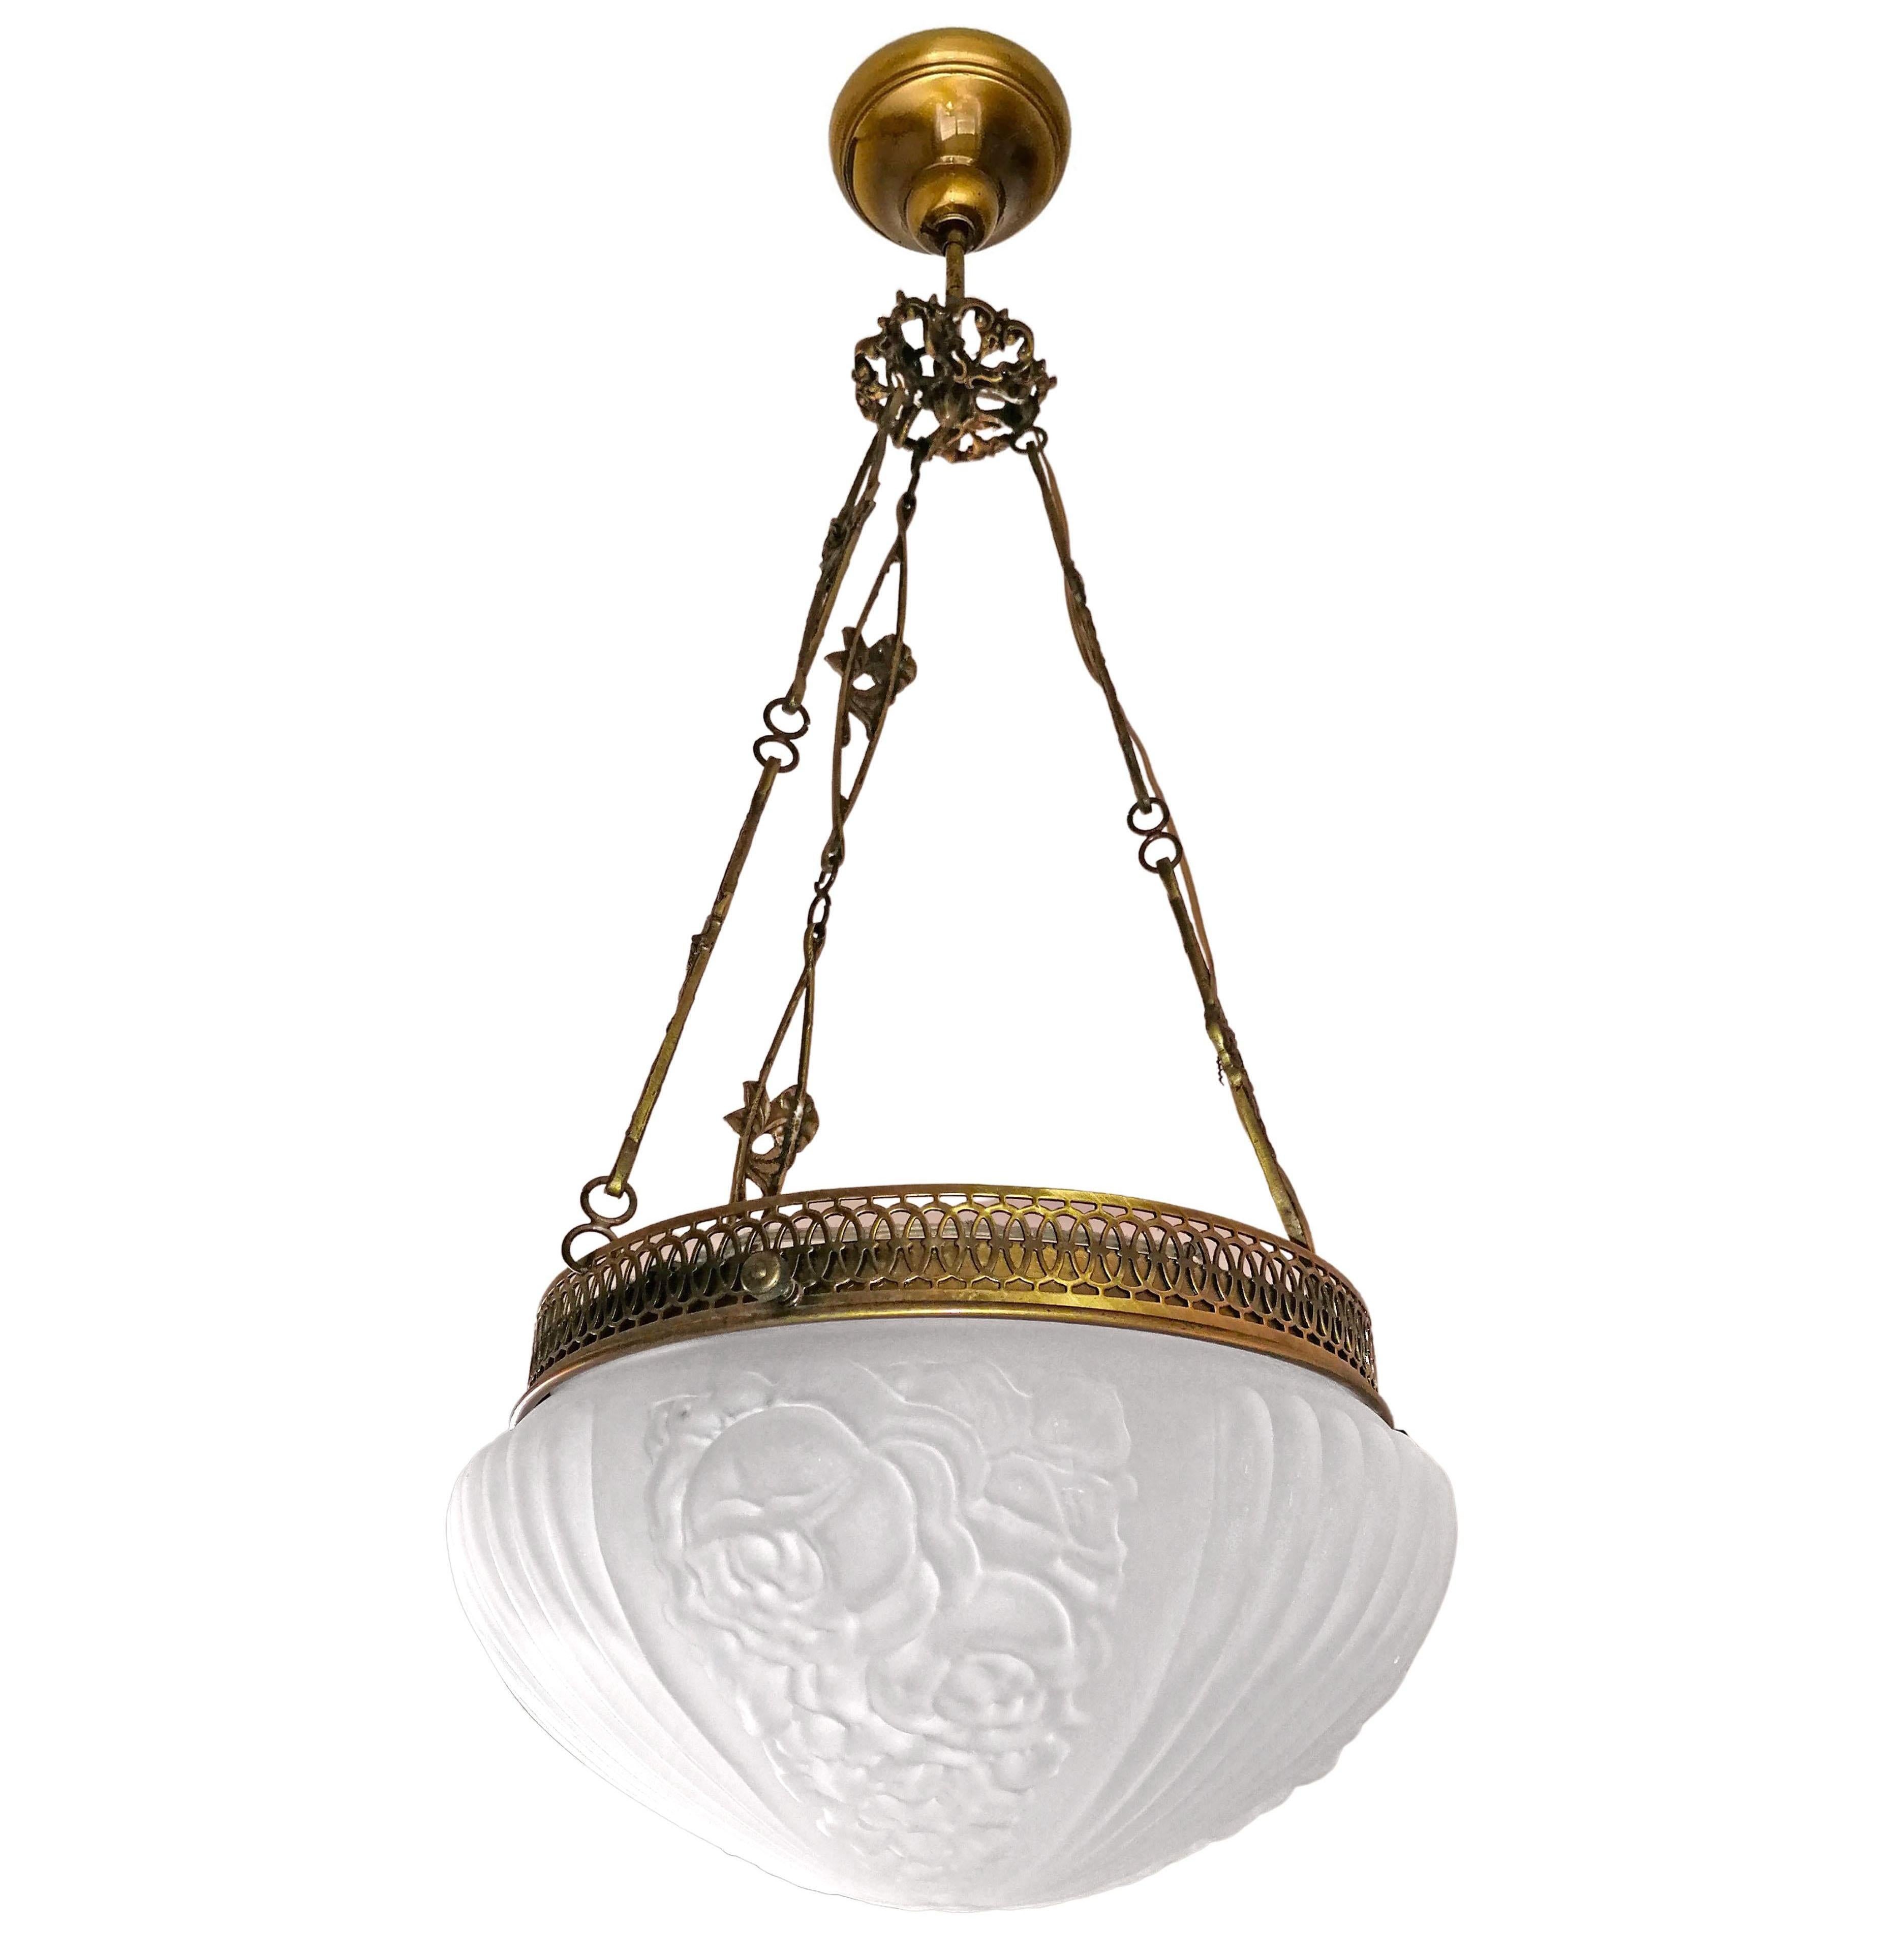 Gorgeous French Art Deco and Art Nouveau in frosted glass chandelier. Engraved gilt bronze and gilt brass trim. Age patina
Dimensions
Height: 33.50 in. (86 cm)
Diameter: 14.18 in. (36 cm)

Two light bulbs E27
Rewired/ Good working condition
Assembly